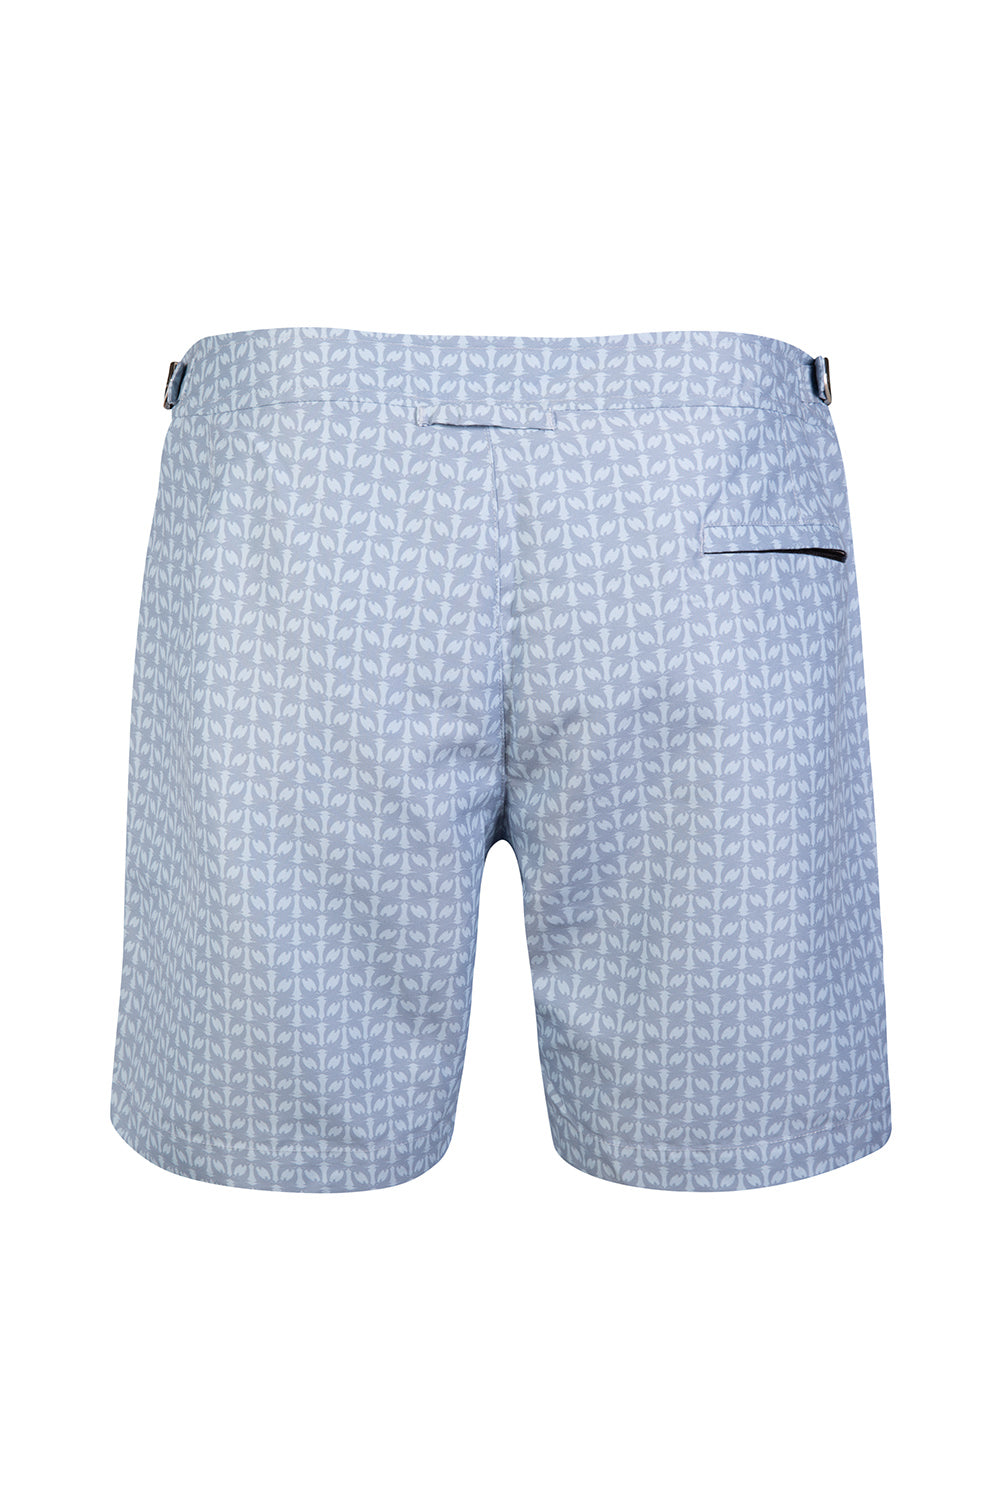 The Jumping Grey Dolphin Tailored Swim Short